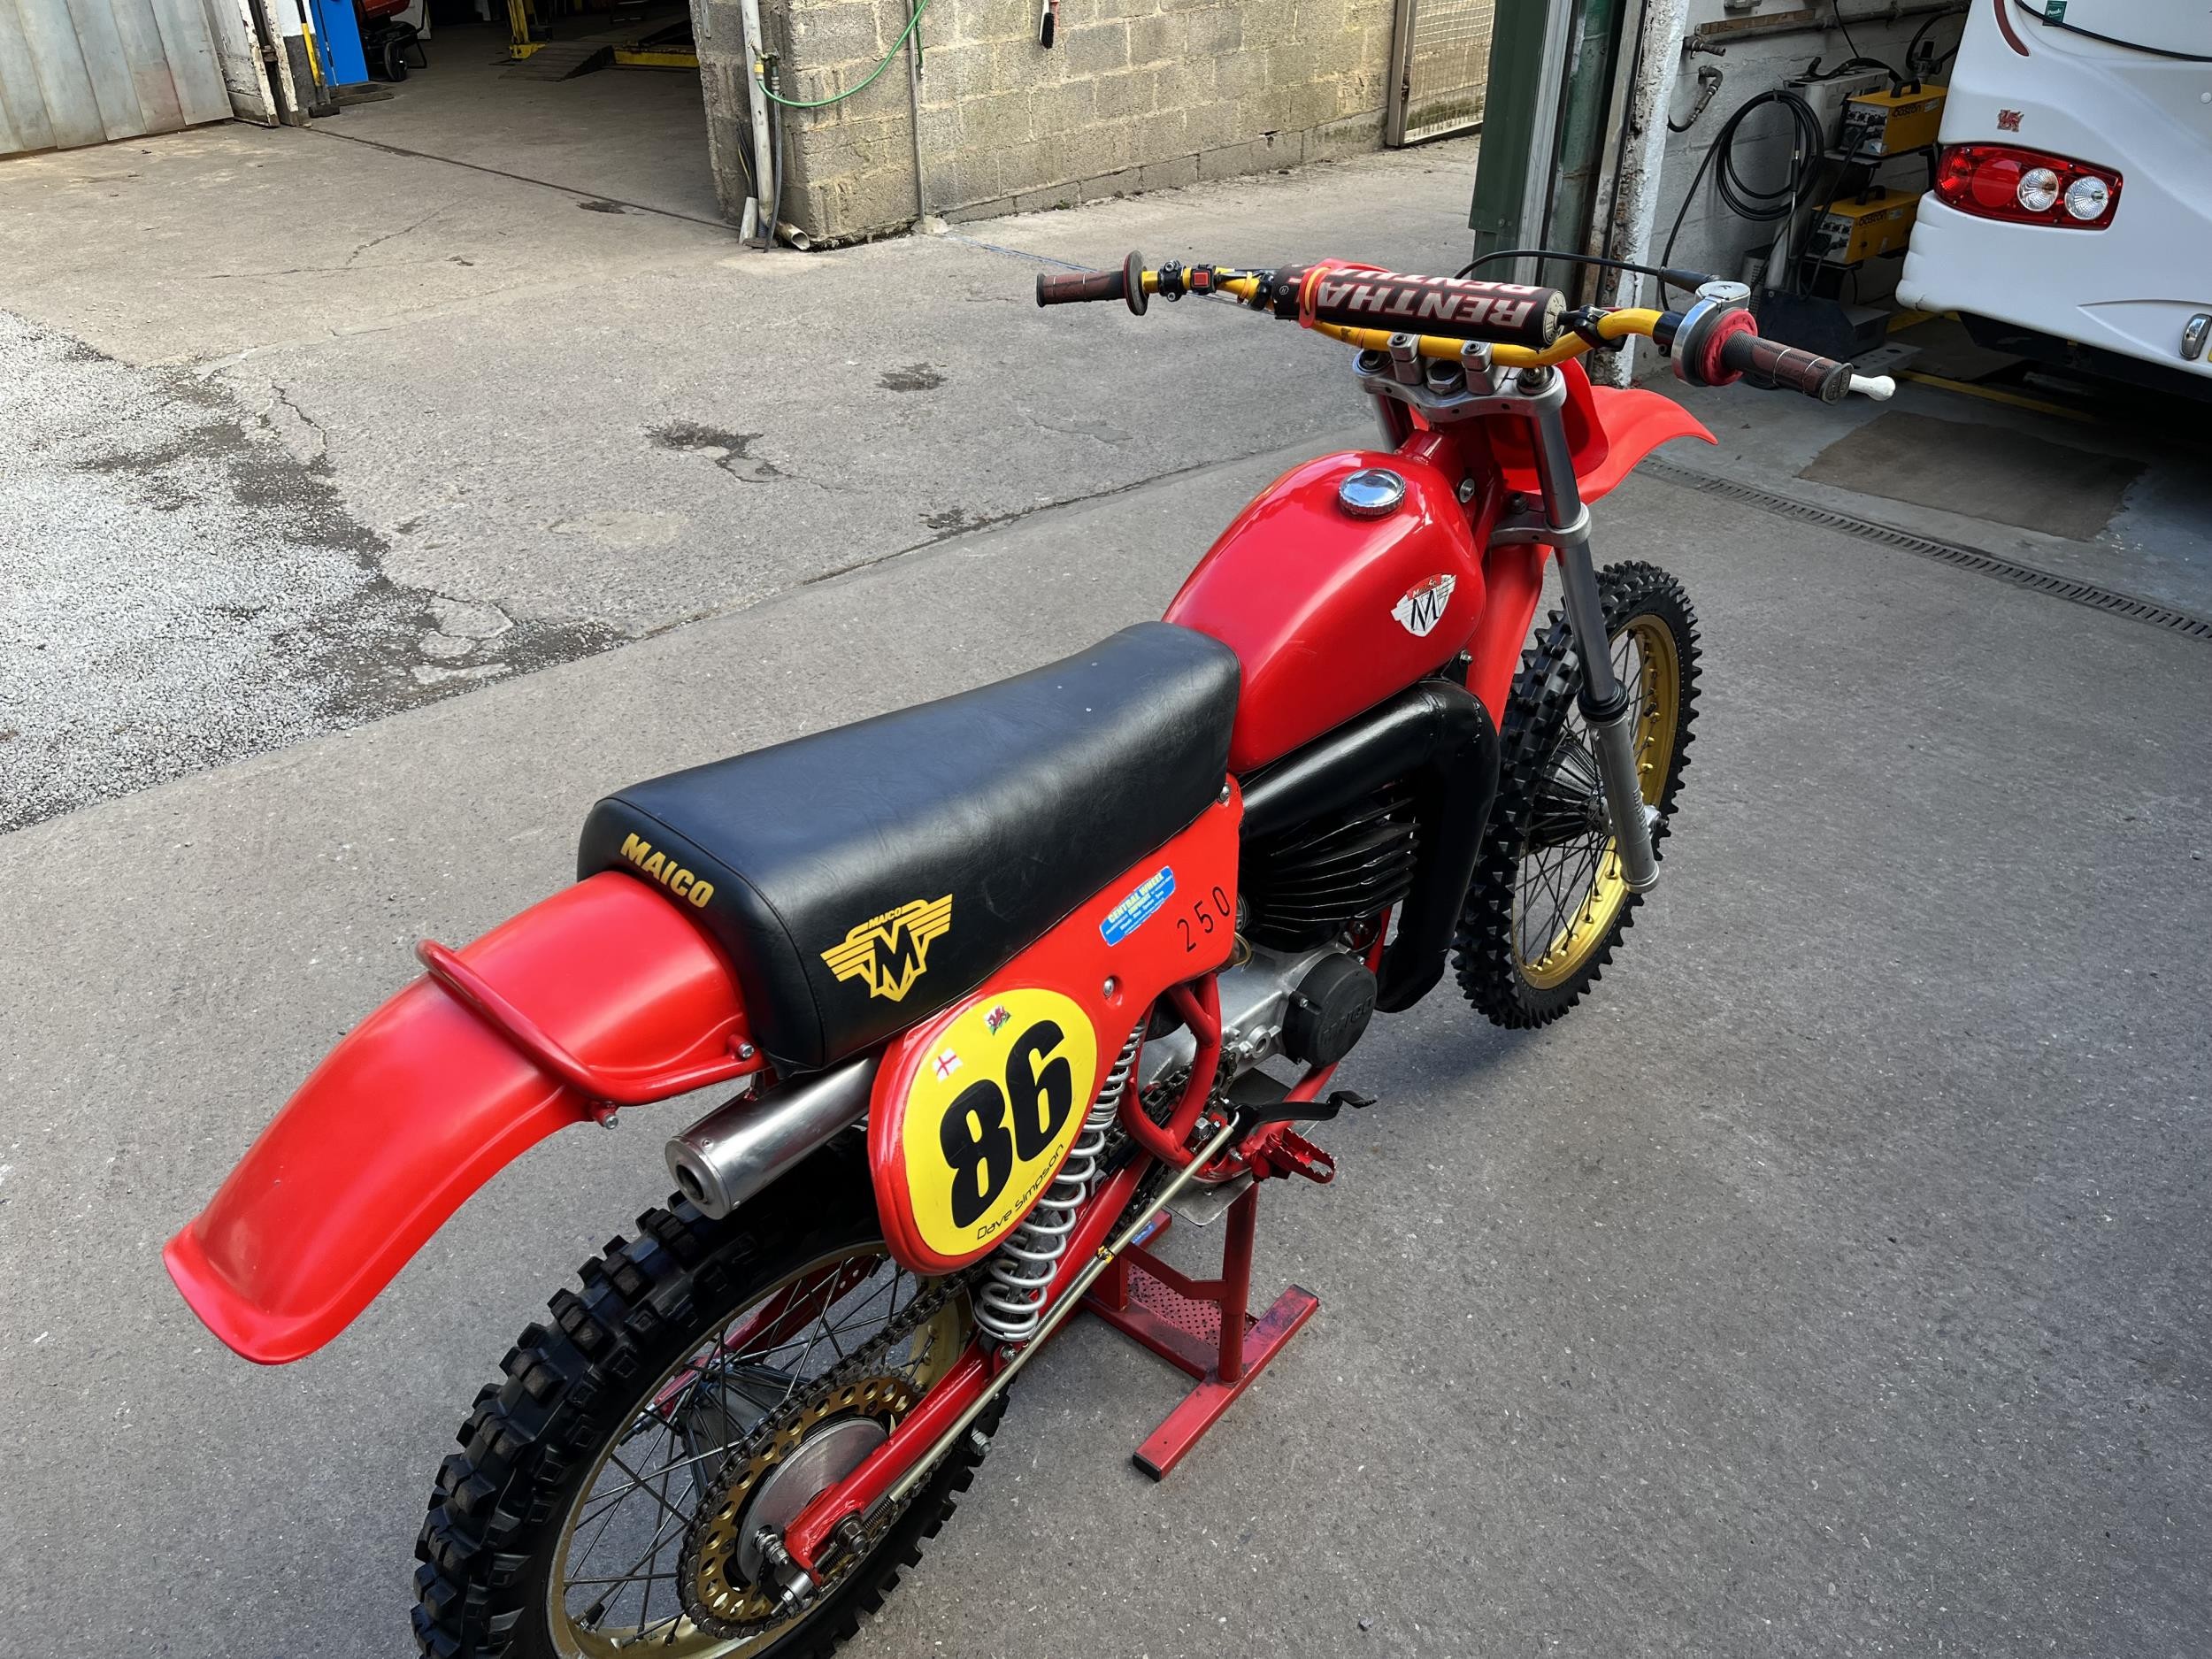 1979 Maico 250 Twin shock Frame number TBA Engine number MT 3362783 Restored by the present owner - Image 3 of 8